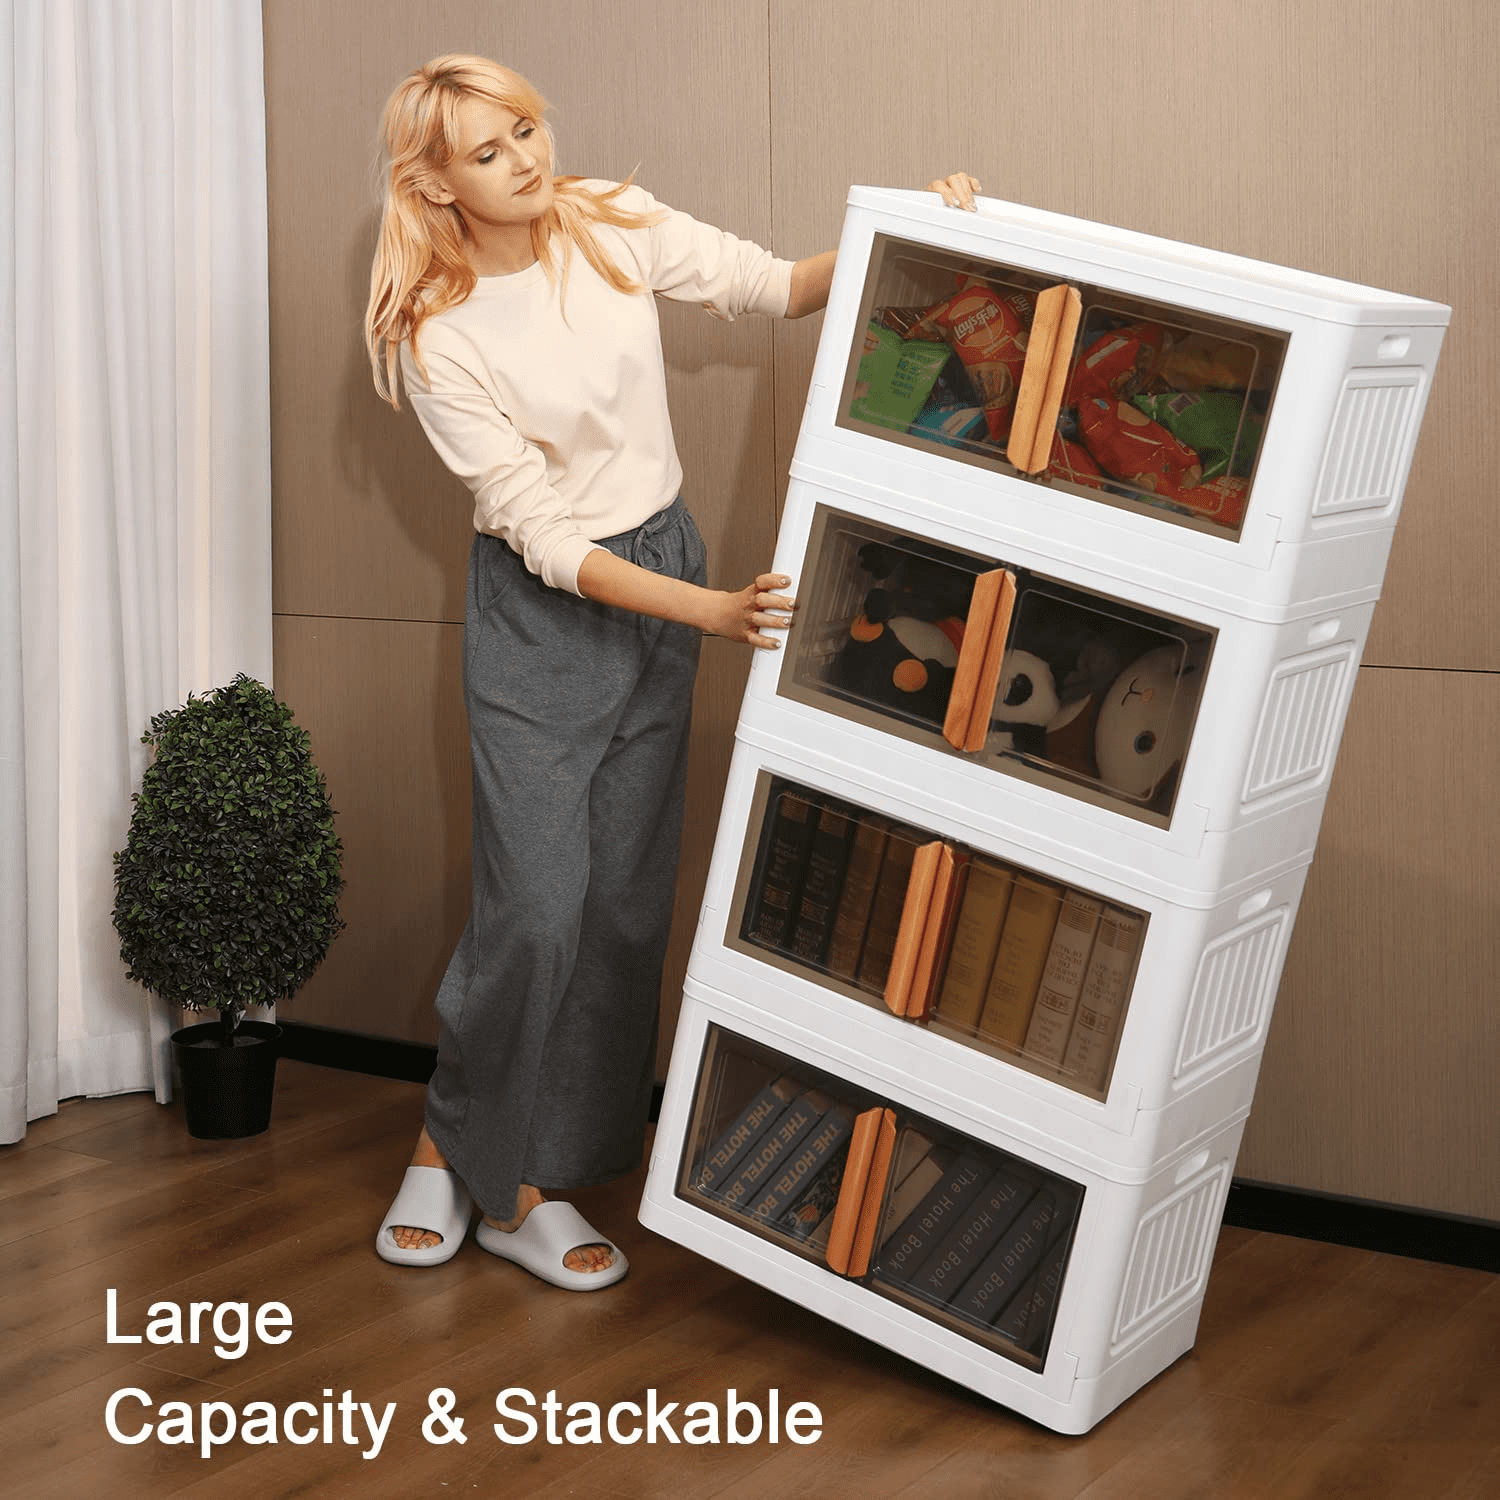 Karlsitek Clearance!storage Bins with Lids,Clear Stackable Lidded Storage Bins,Collapsible Storage Cube Bins with Wheels, Plastic Storage Box Containers with